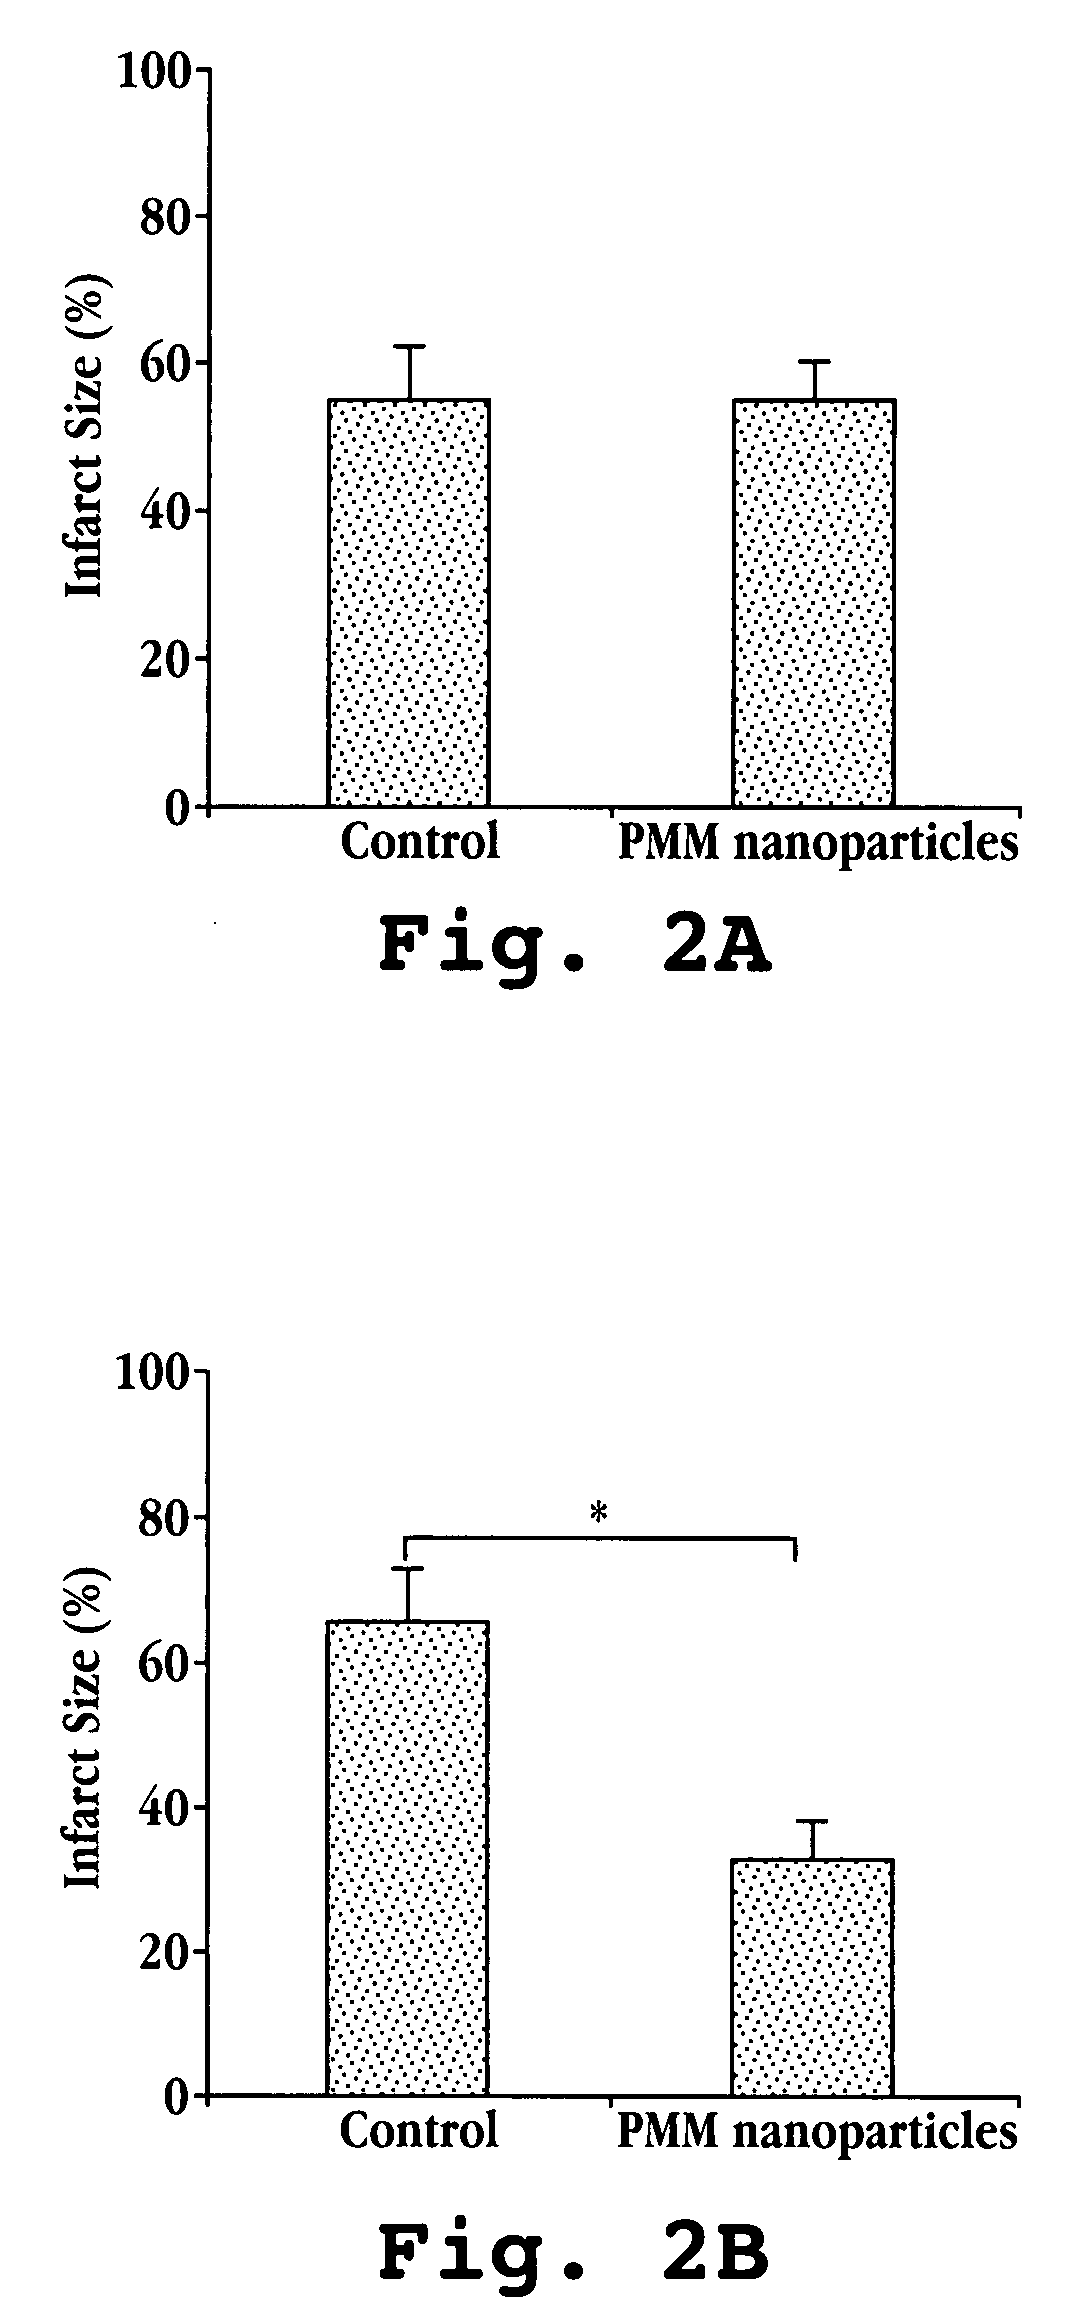 Method and use of nano-scale devices for reduction of tissue injury in ischemic and reperfusion injury